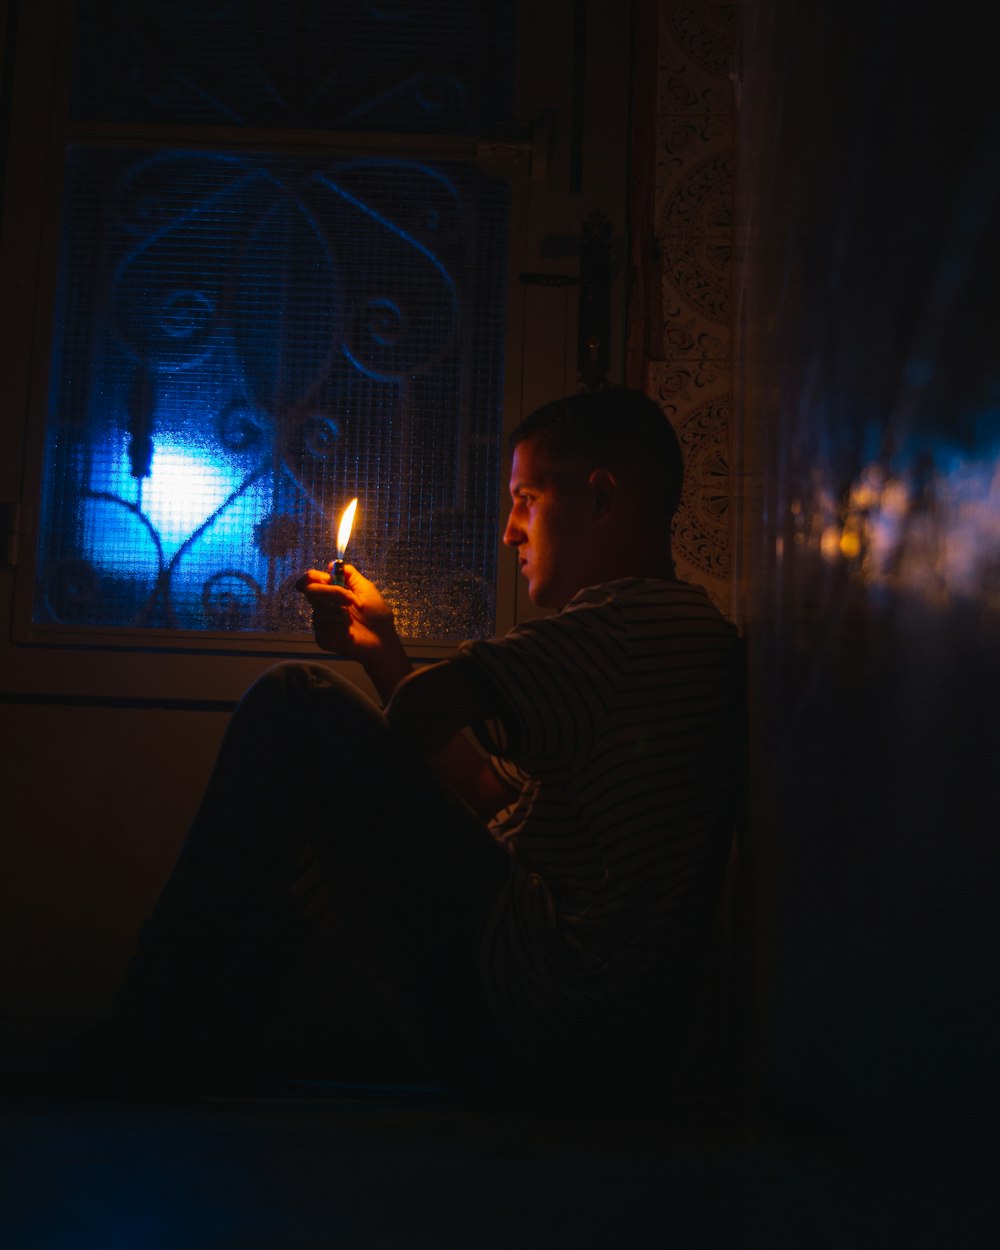 a man sitting in a dark room holding a lit candle